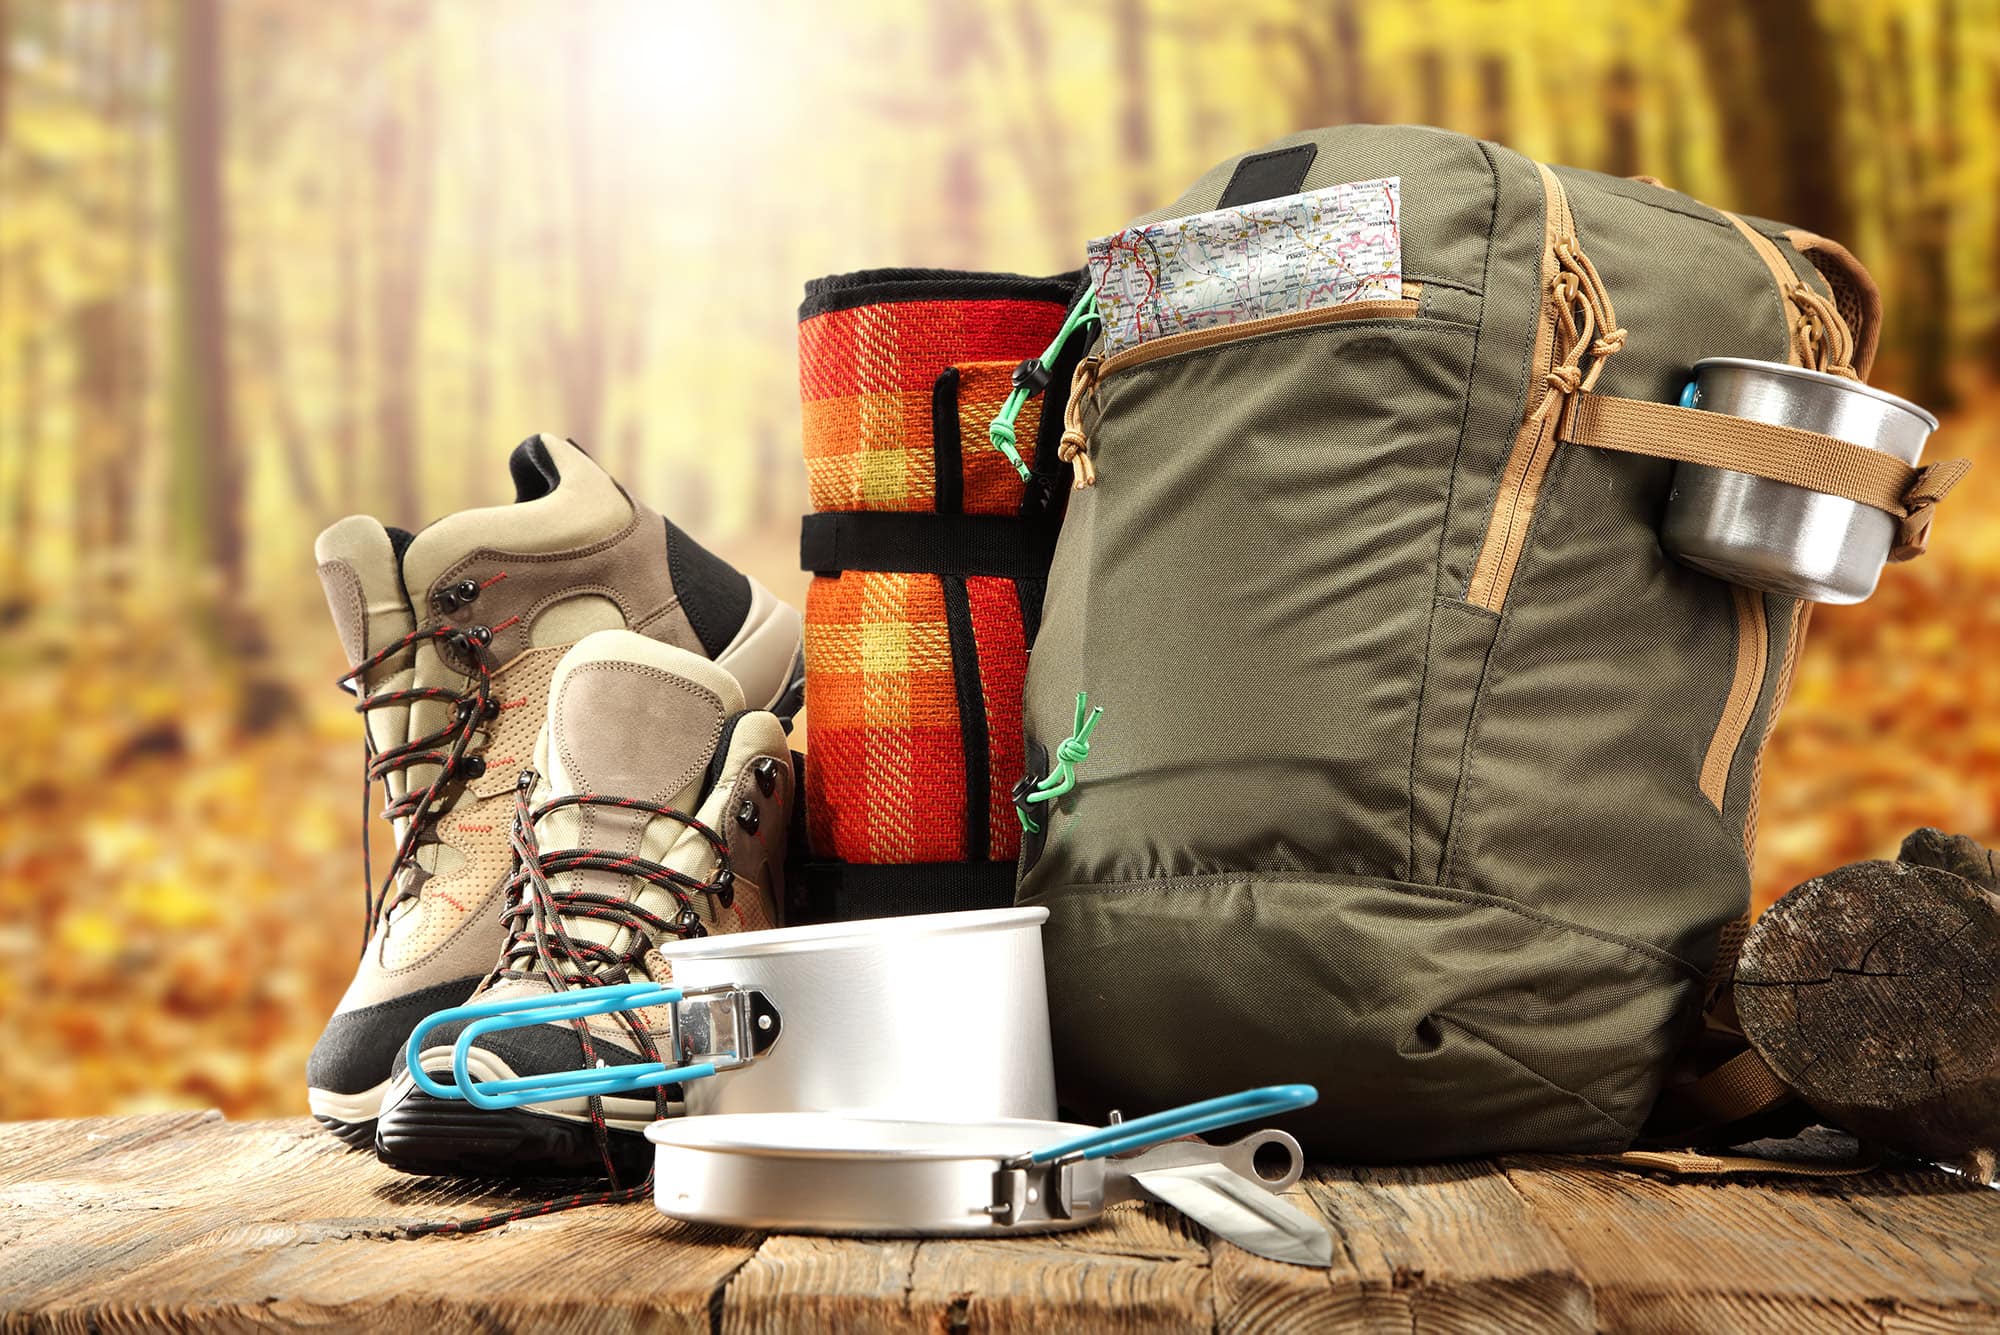 Image of camping and hiking gear.